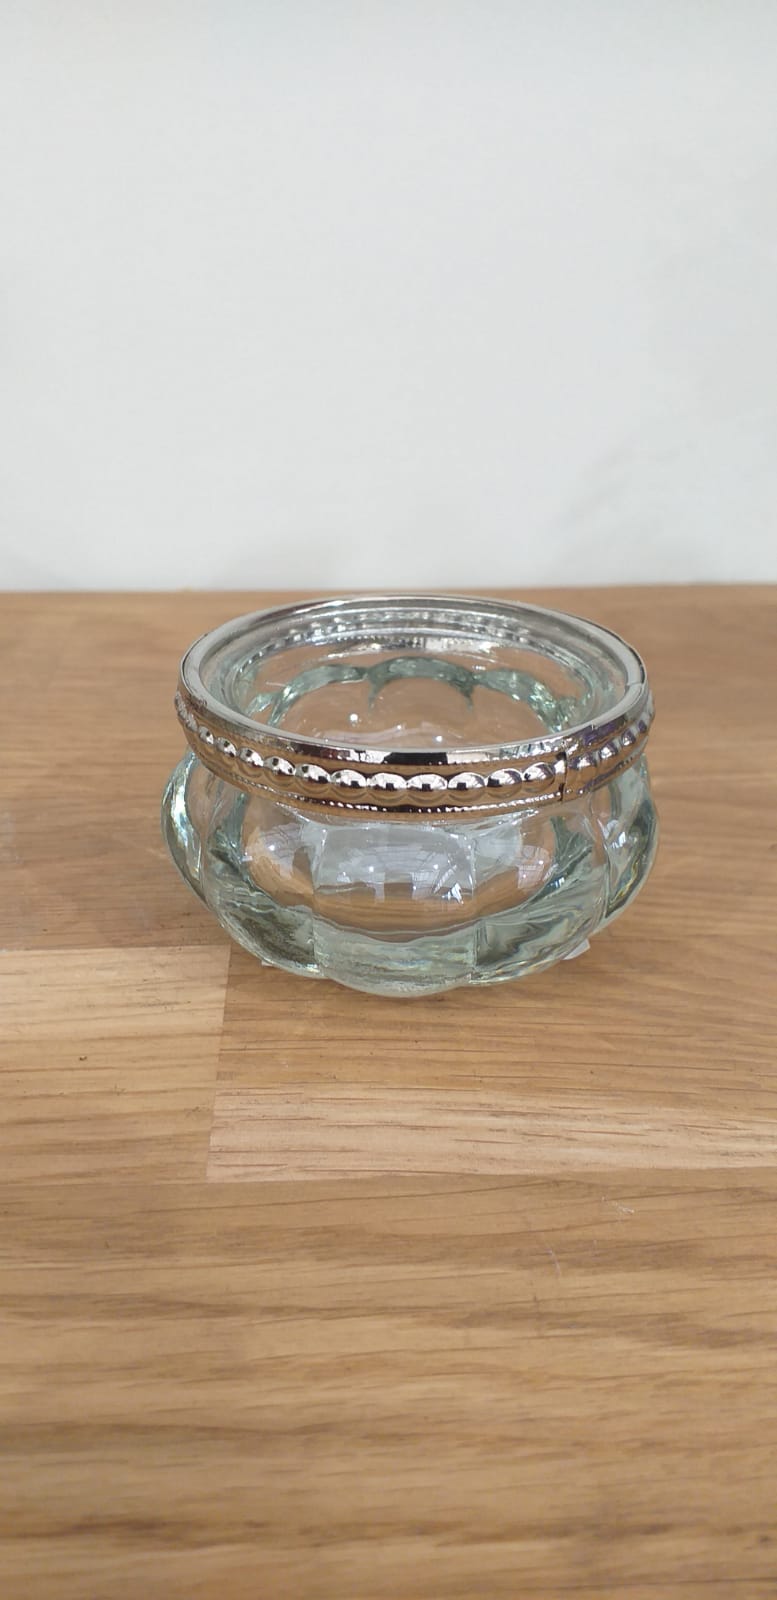 Tealight Holder With Metal Decoration 6 x 3.5cm